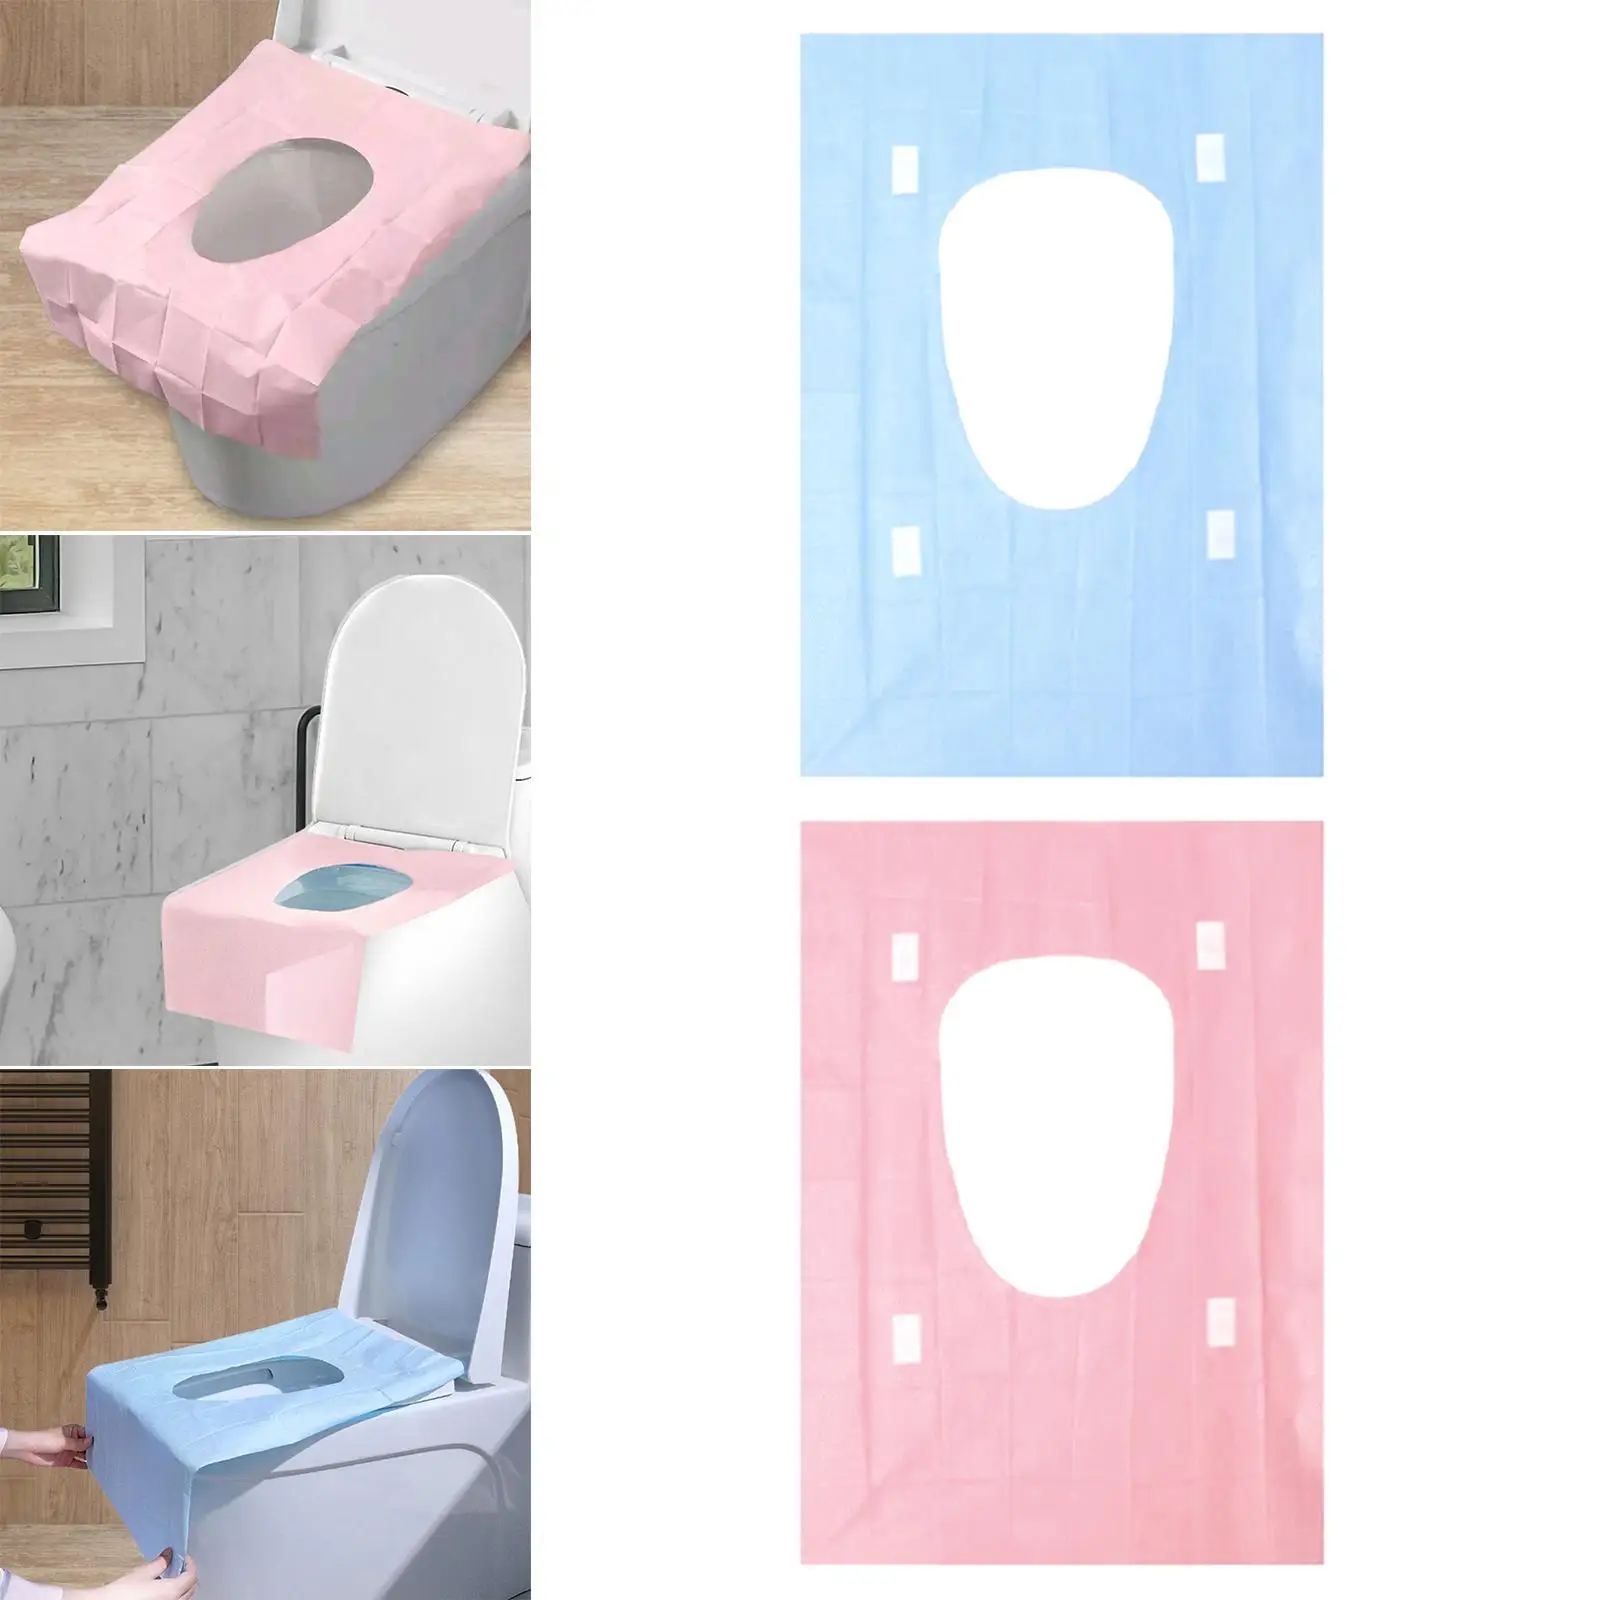 20 Pieces Toilet Seat Covers Disposable Firmly Fixed Liners for Camping